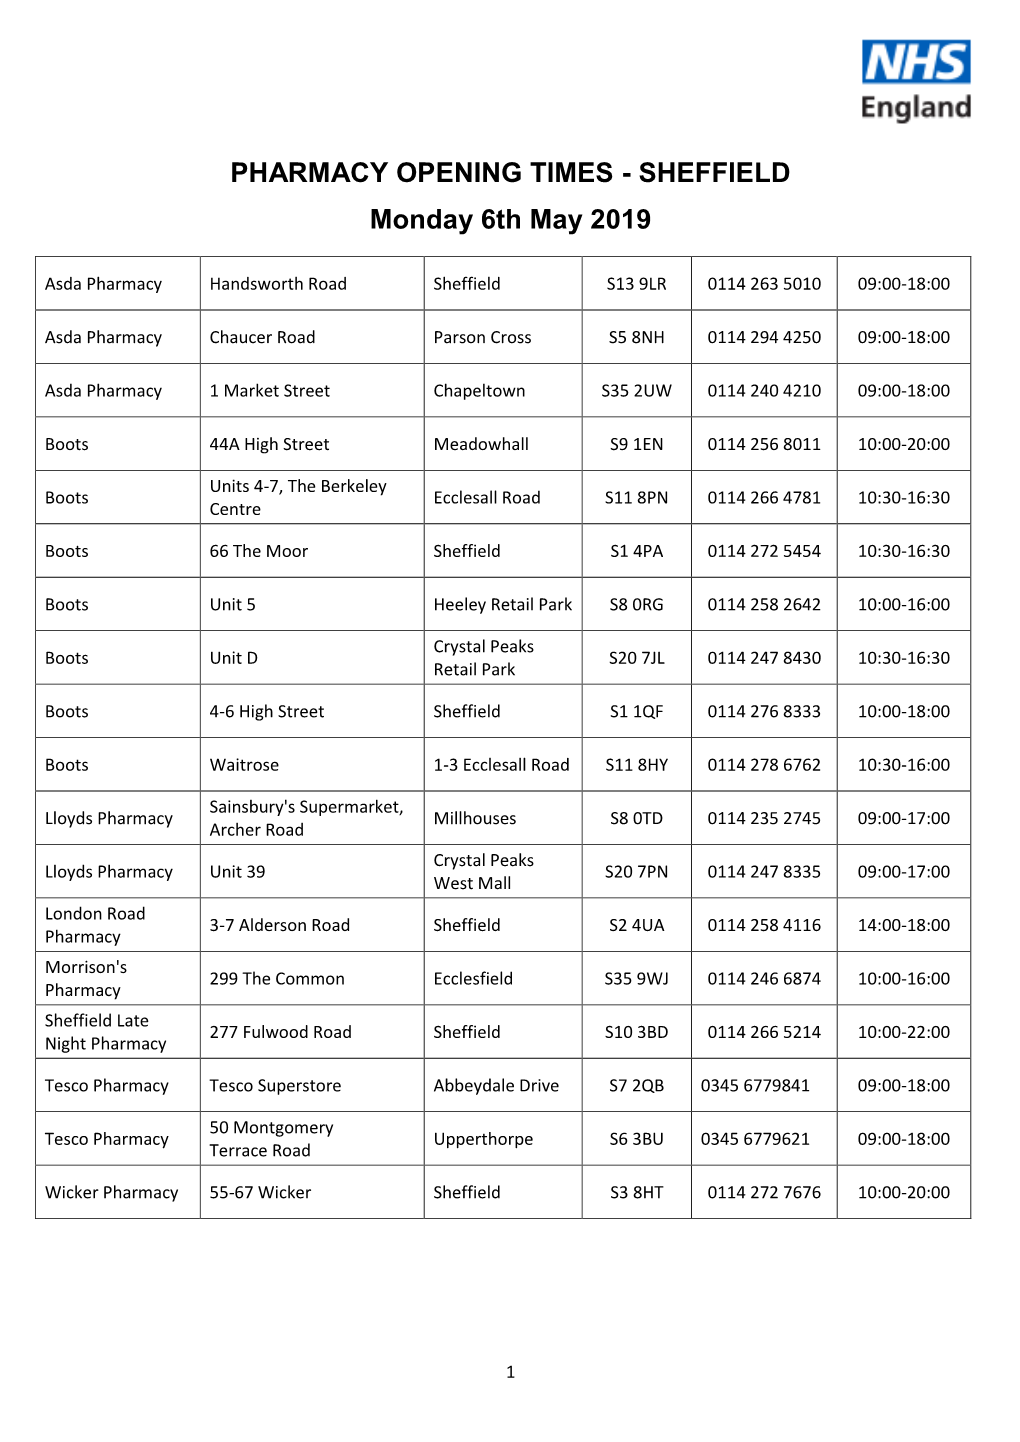 PHARMACY OPENING TIMES - SHEFFIELD Monday 6Th May 2019